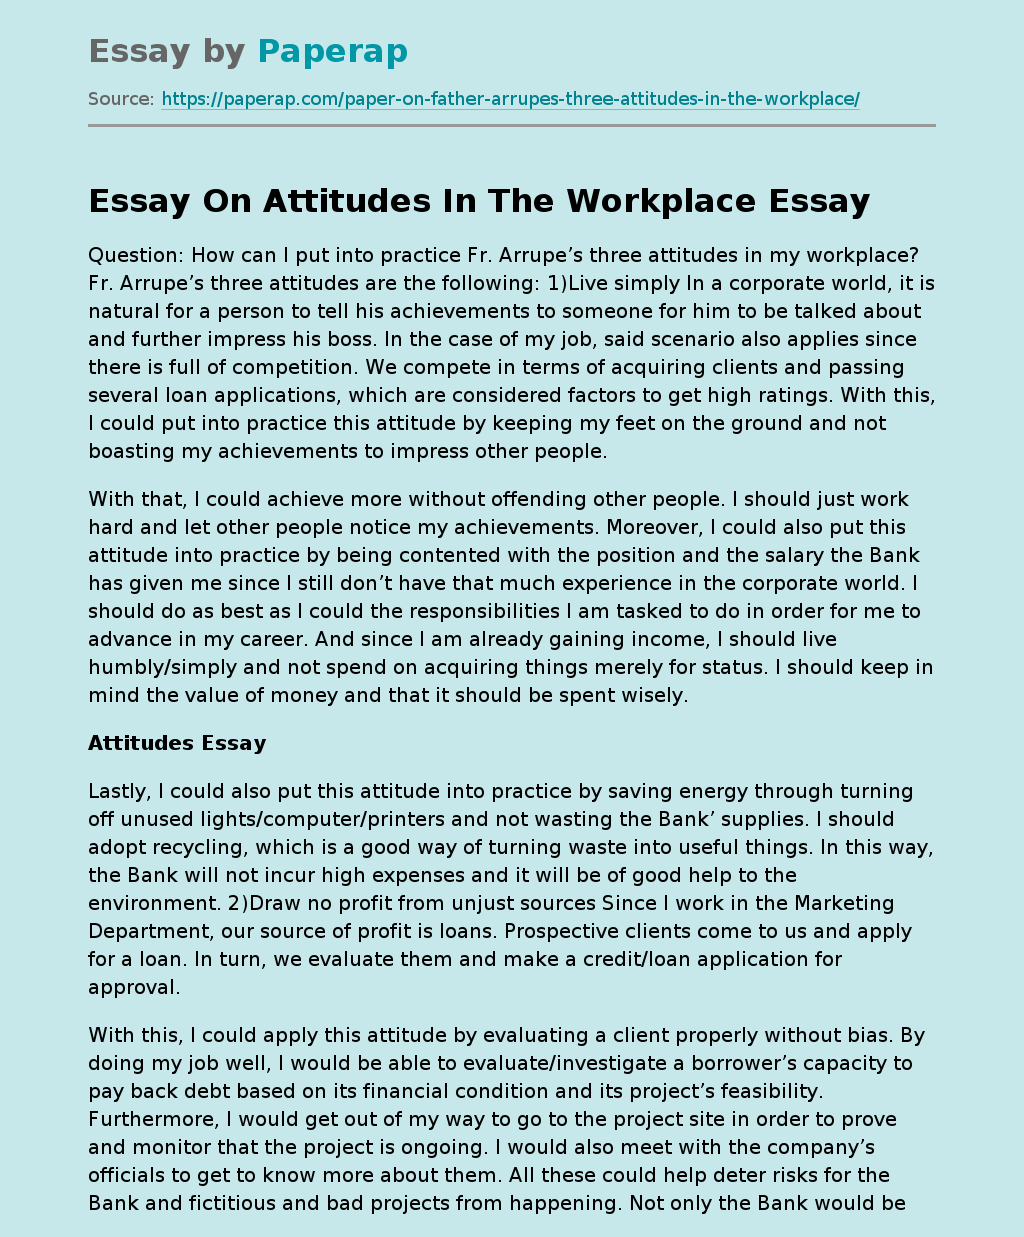 Essay On Attitudes In The Workplace